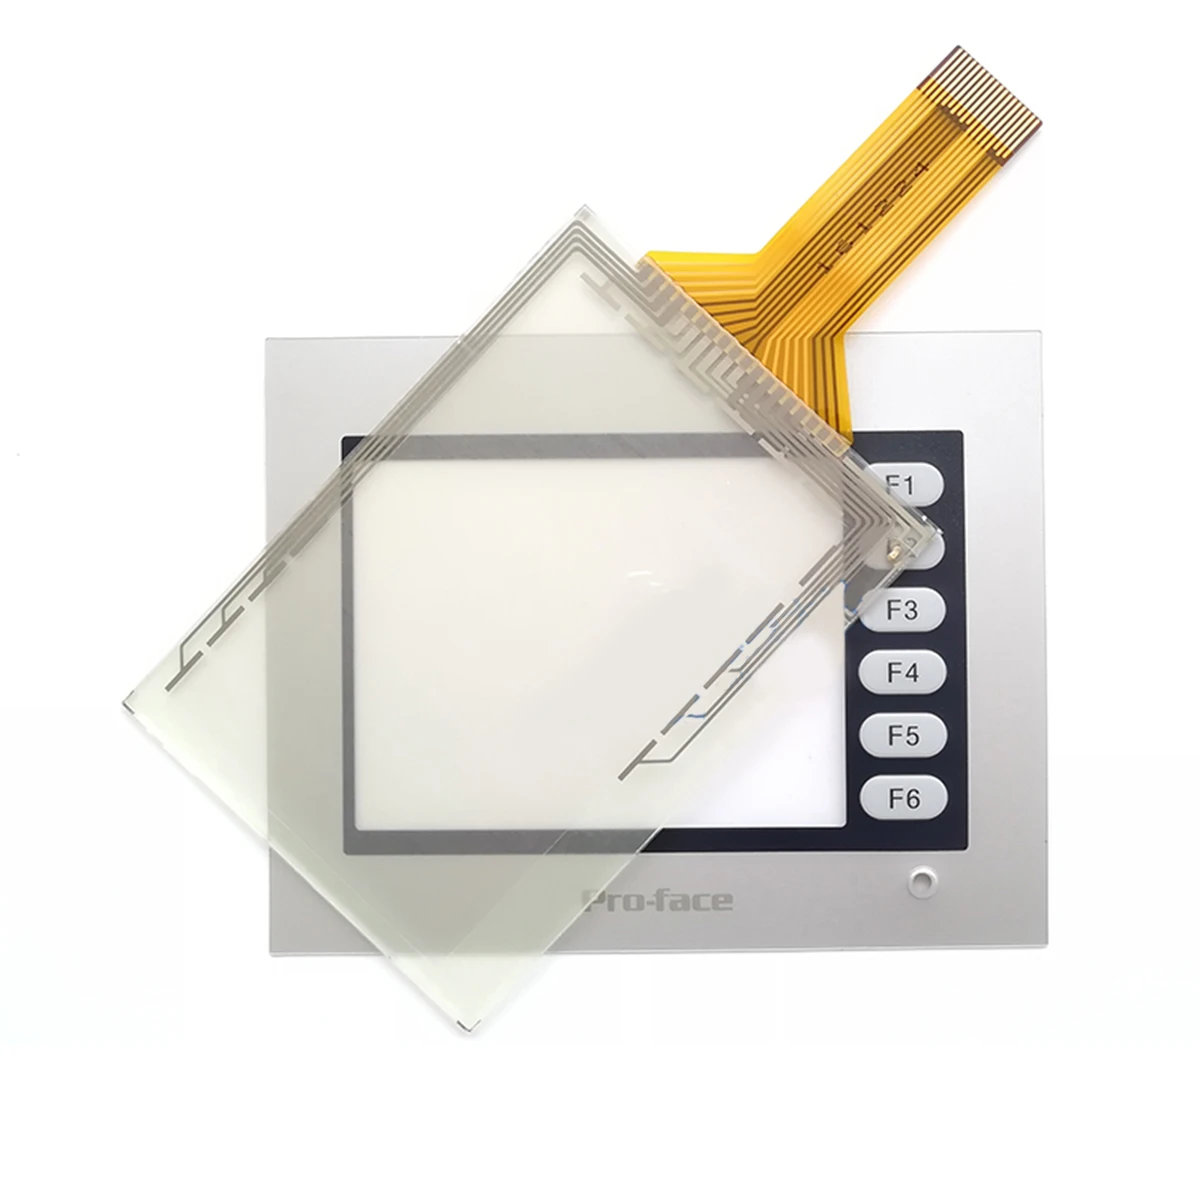 

ST400-AG41-24V ST402-AG41 3180053-04 Protective Film + Touch Screen for Pro-face